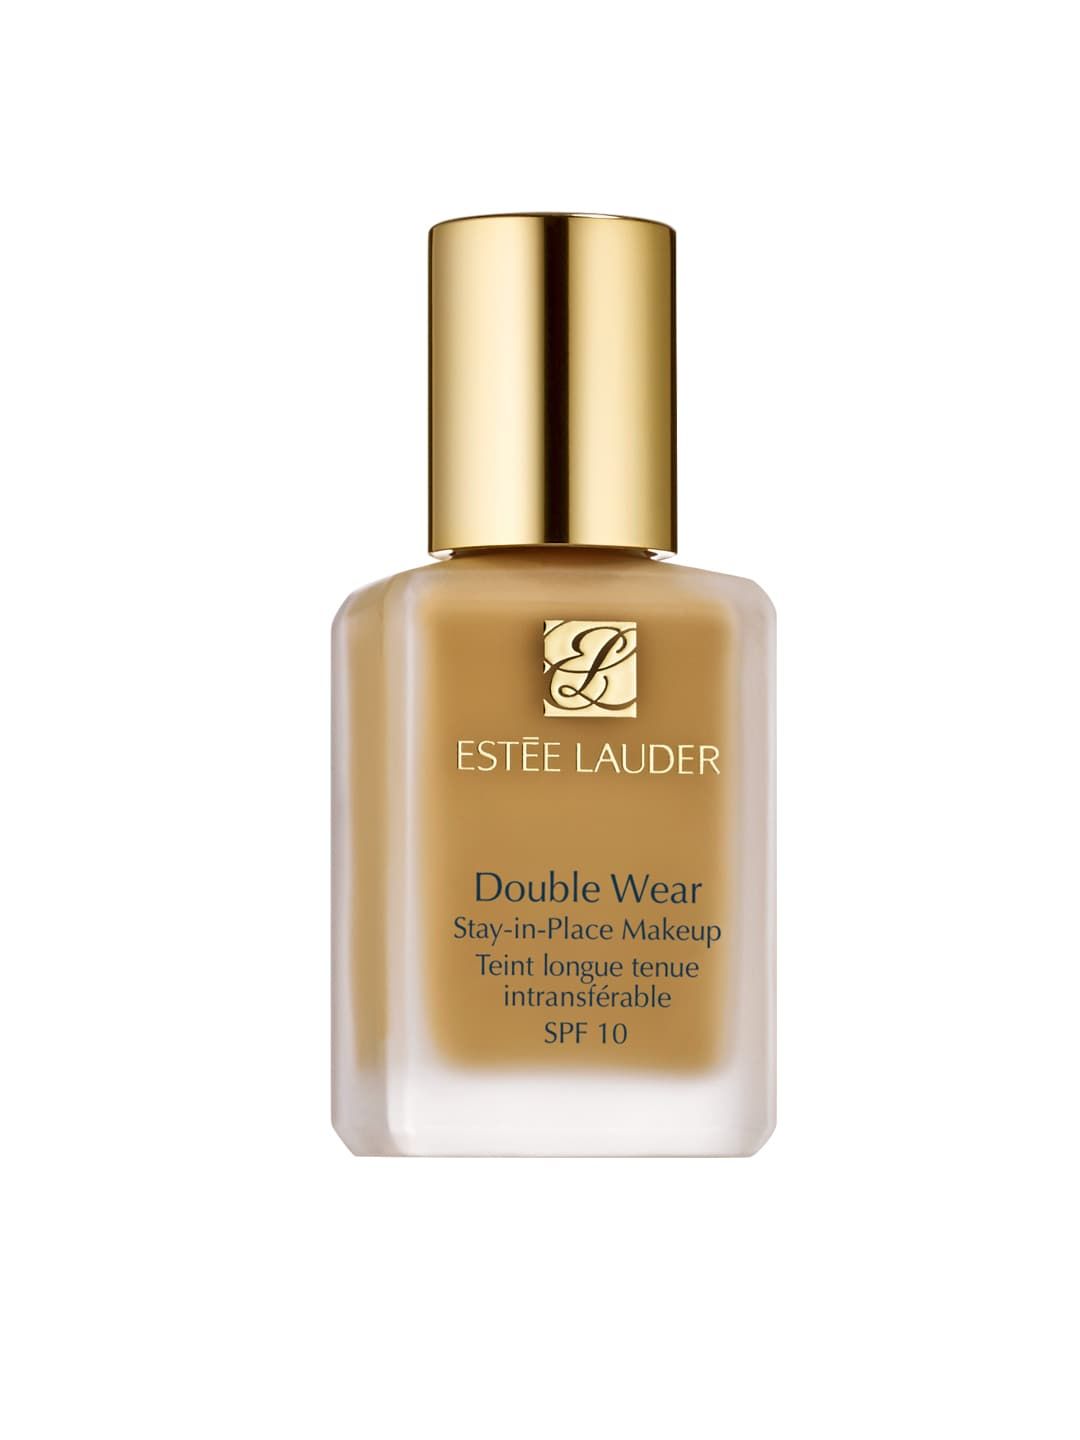 Estee Lauder Double Wear Stay-In-Place Foundation with SPF 10 - Cashew 30ml Price in India